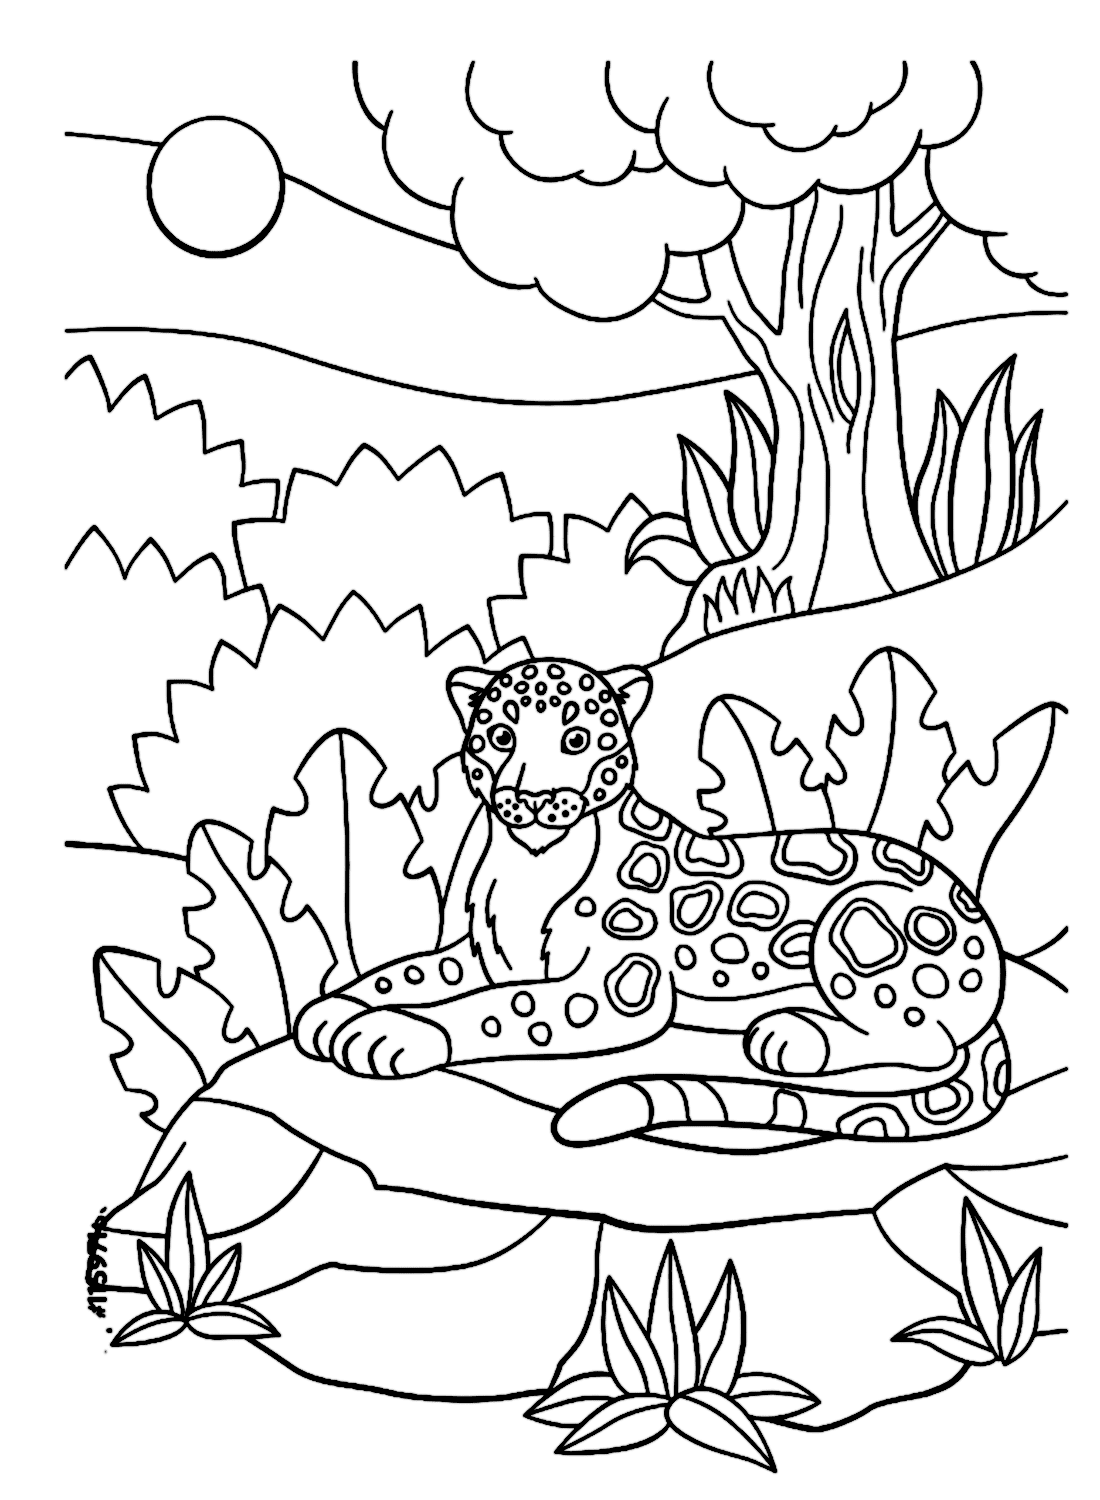 Jaguar Resting In The Jungle Coloring Page - Free Printable Coloring Pages